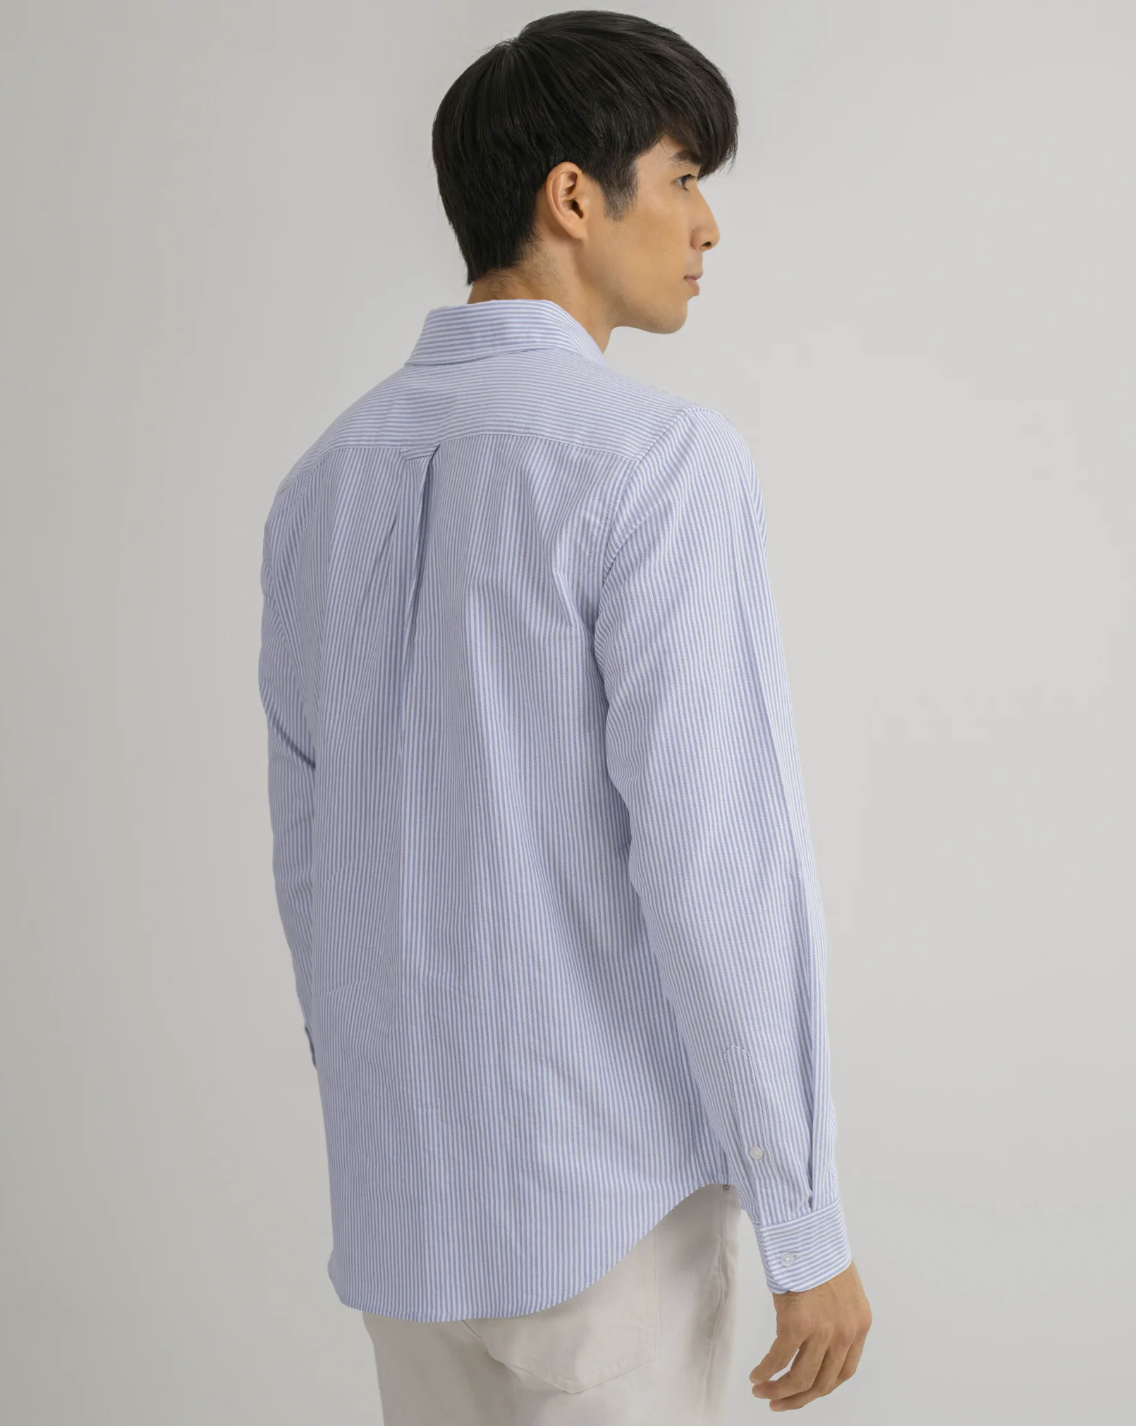 Source The Oxford Shirt